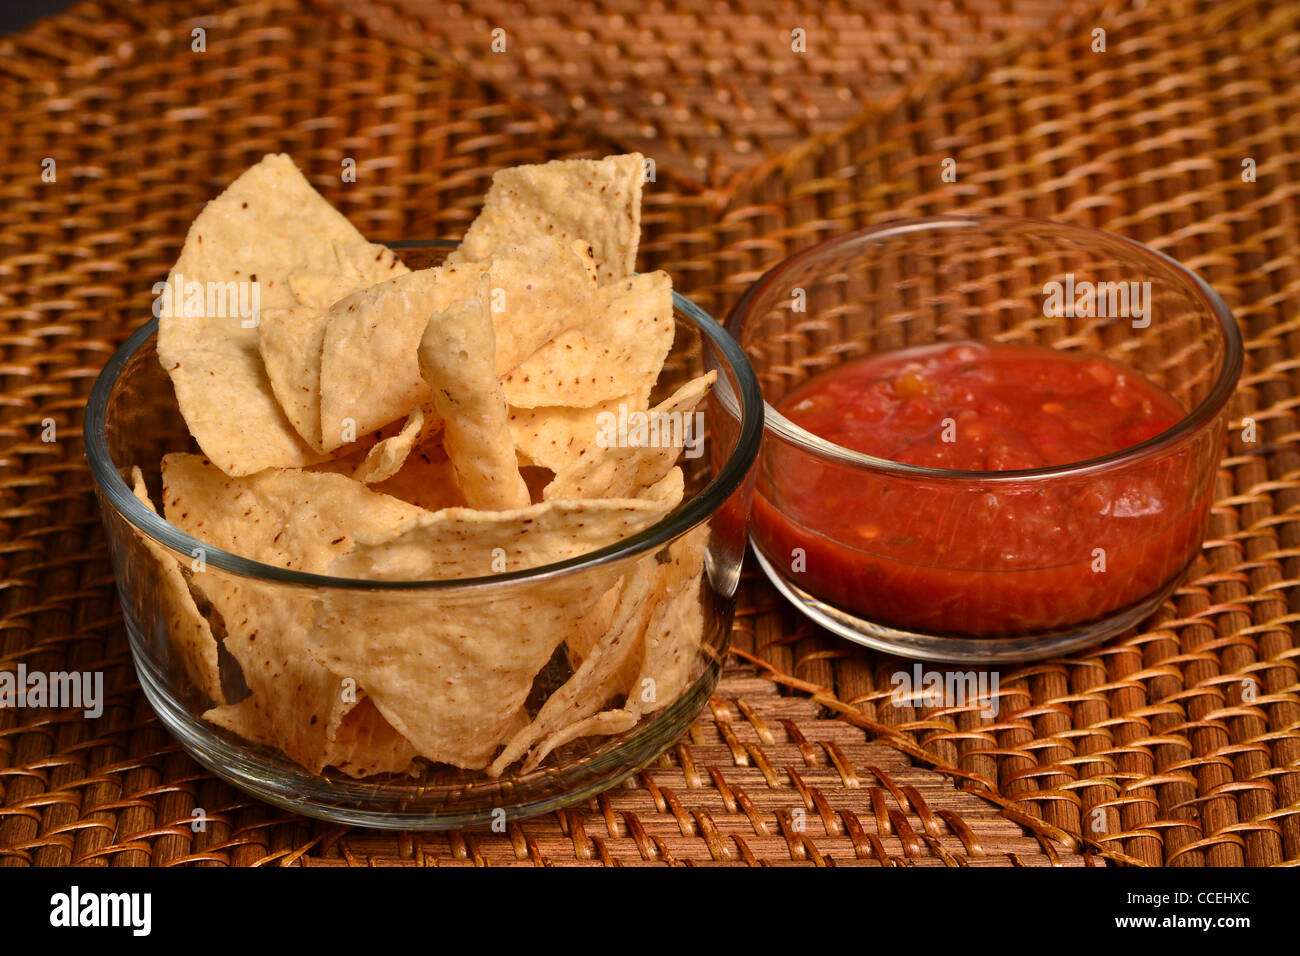 Chips and Salsa in glass bowl on a wicker style mat. Stock Photo